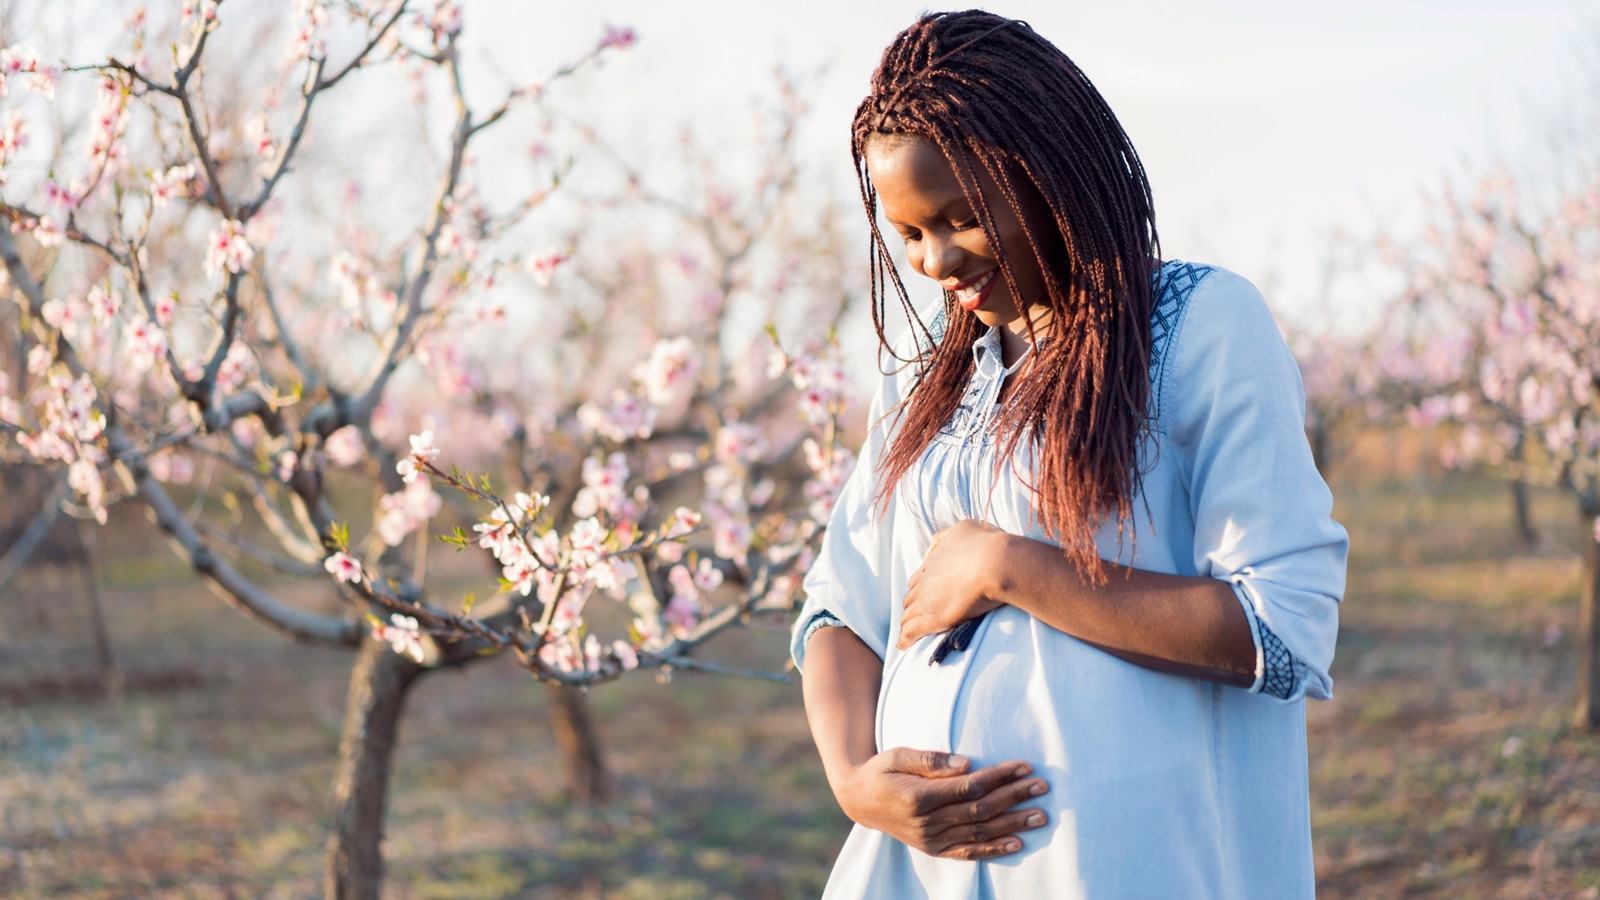 CVS Health announces $1.74 million commitment to maternal health as part of Biden-Harris Maternal Health Call to Action Day 